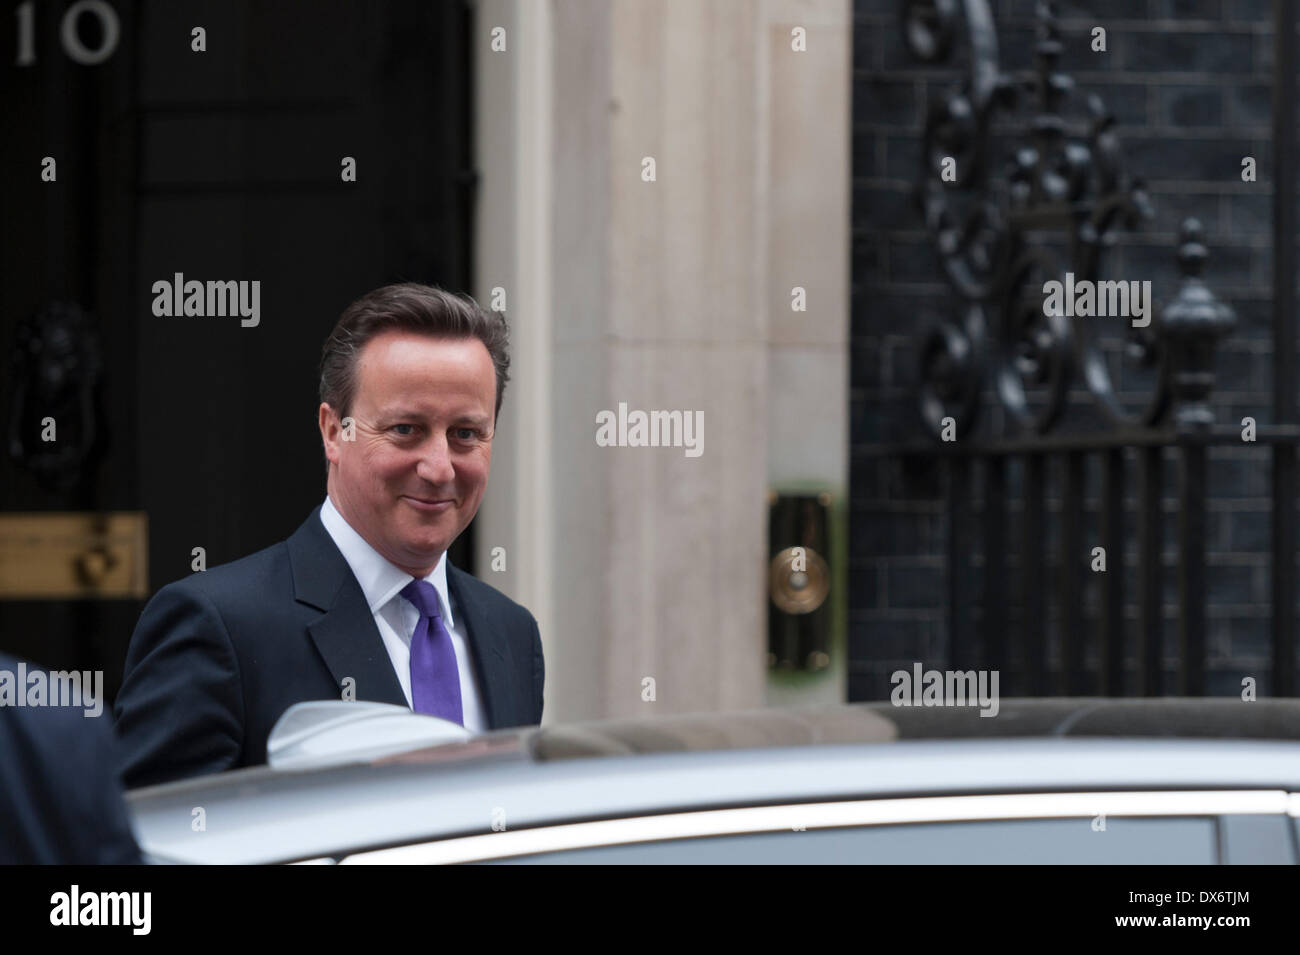 Downing Street, London, UK. 19th Mar, 2014. Downing Street was a hive of activity on Budget Day as the government prepared to disclose its budget for 2014. Pictured: DAVID CAMERON MP - British Prime Minister. Credit:  Lee Thomas/Alamy Live News Stock Photo